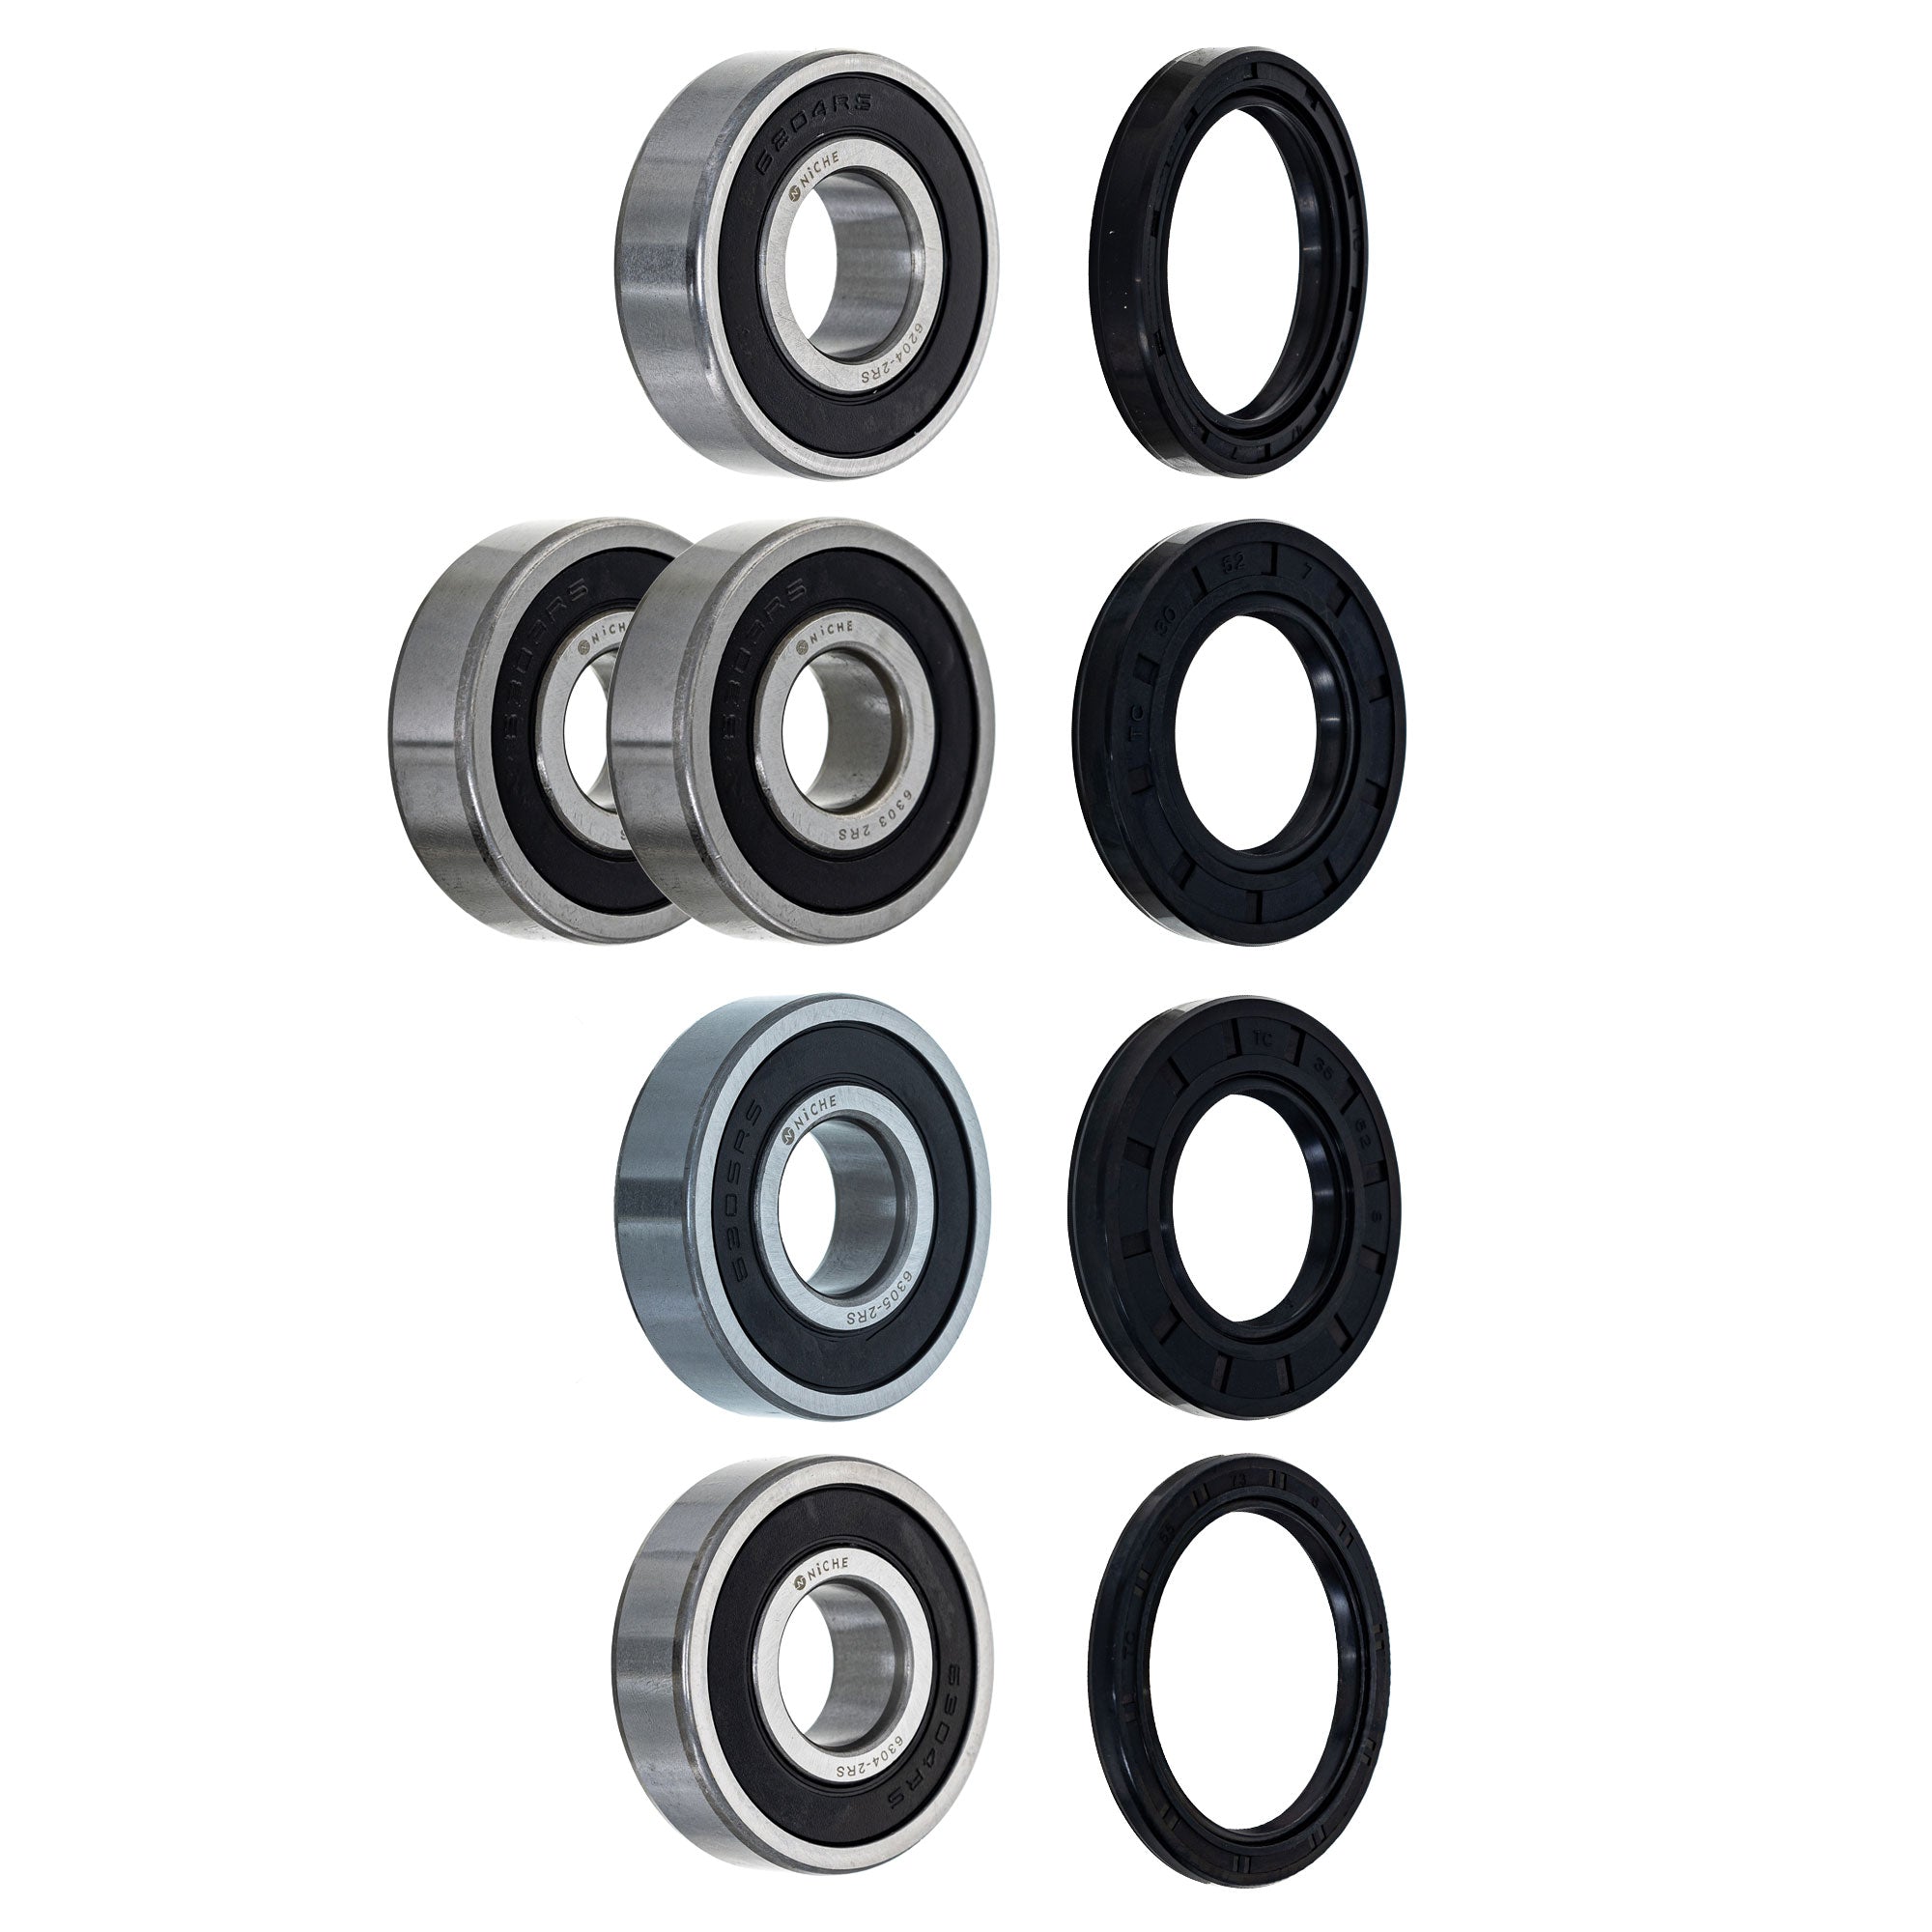 Wheel Bearing Seal Kit for zOTHER Ref No Tiger NICHE MK1008620